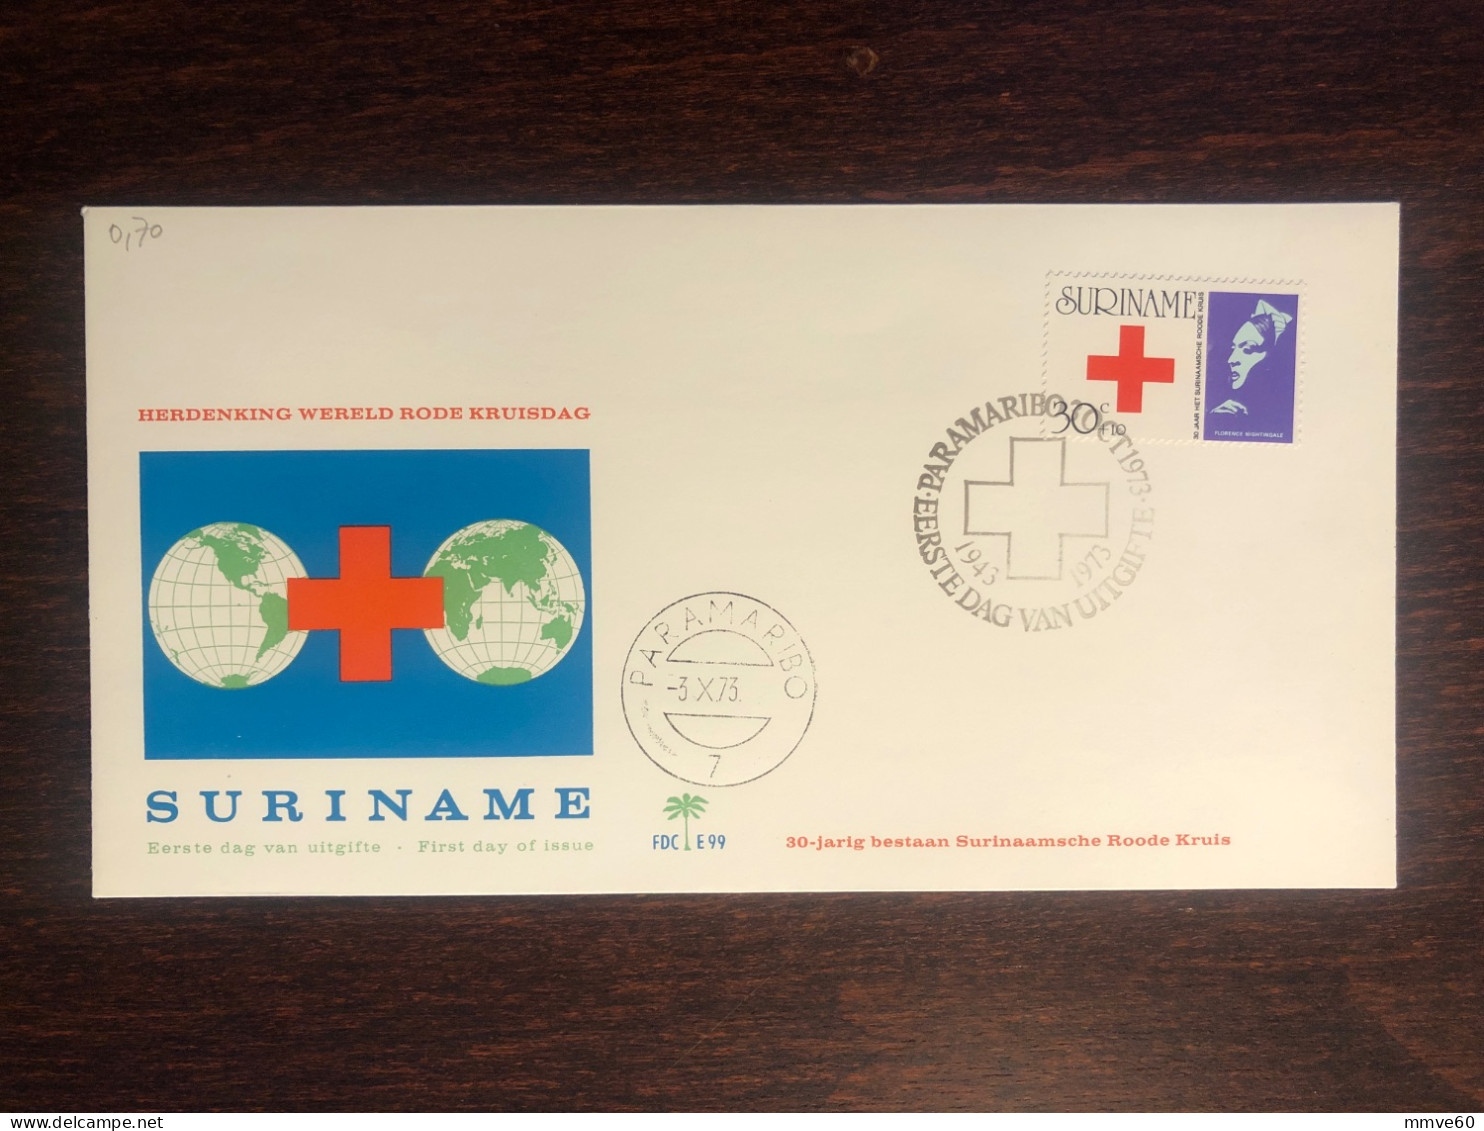 SURINAM FDC COVER 1973 YEAR  RED CROSS F. NIGHTINGALE HEALTH MEDICINE STAMPS - Suriname